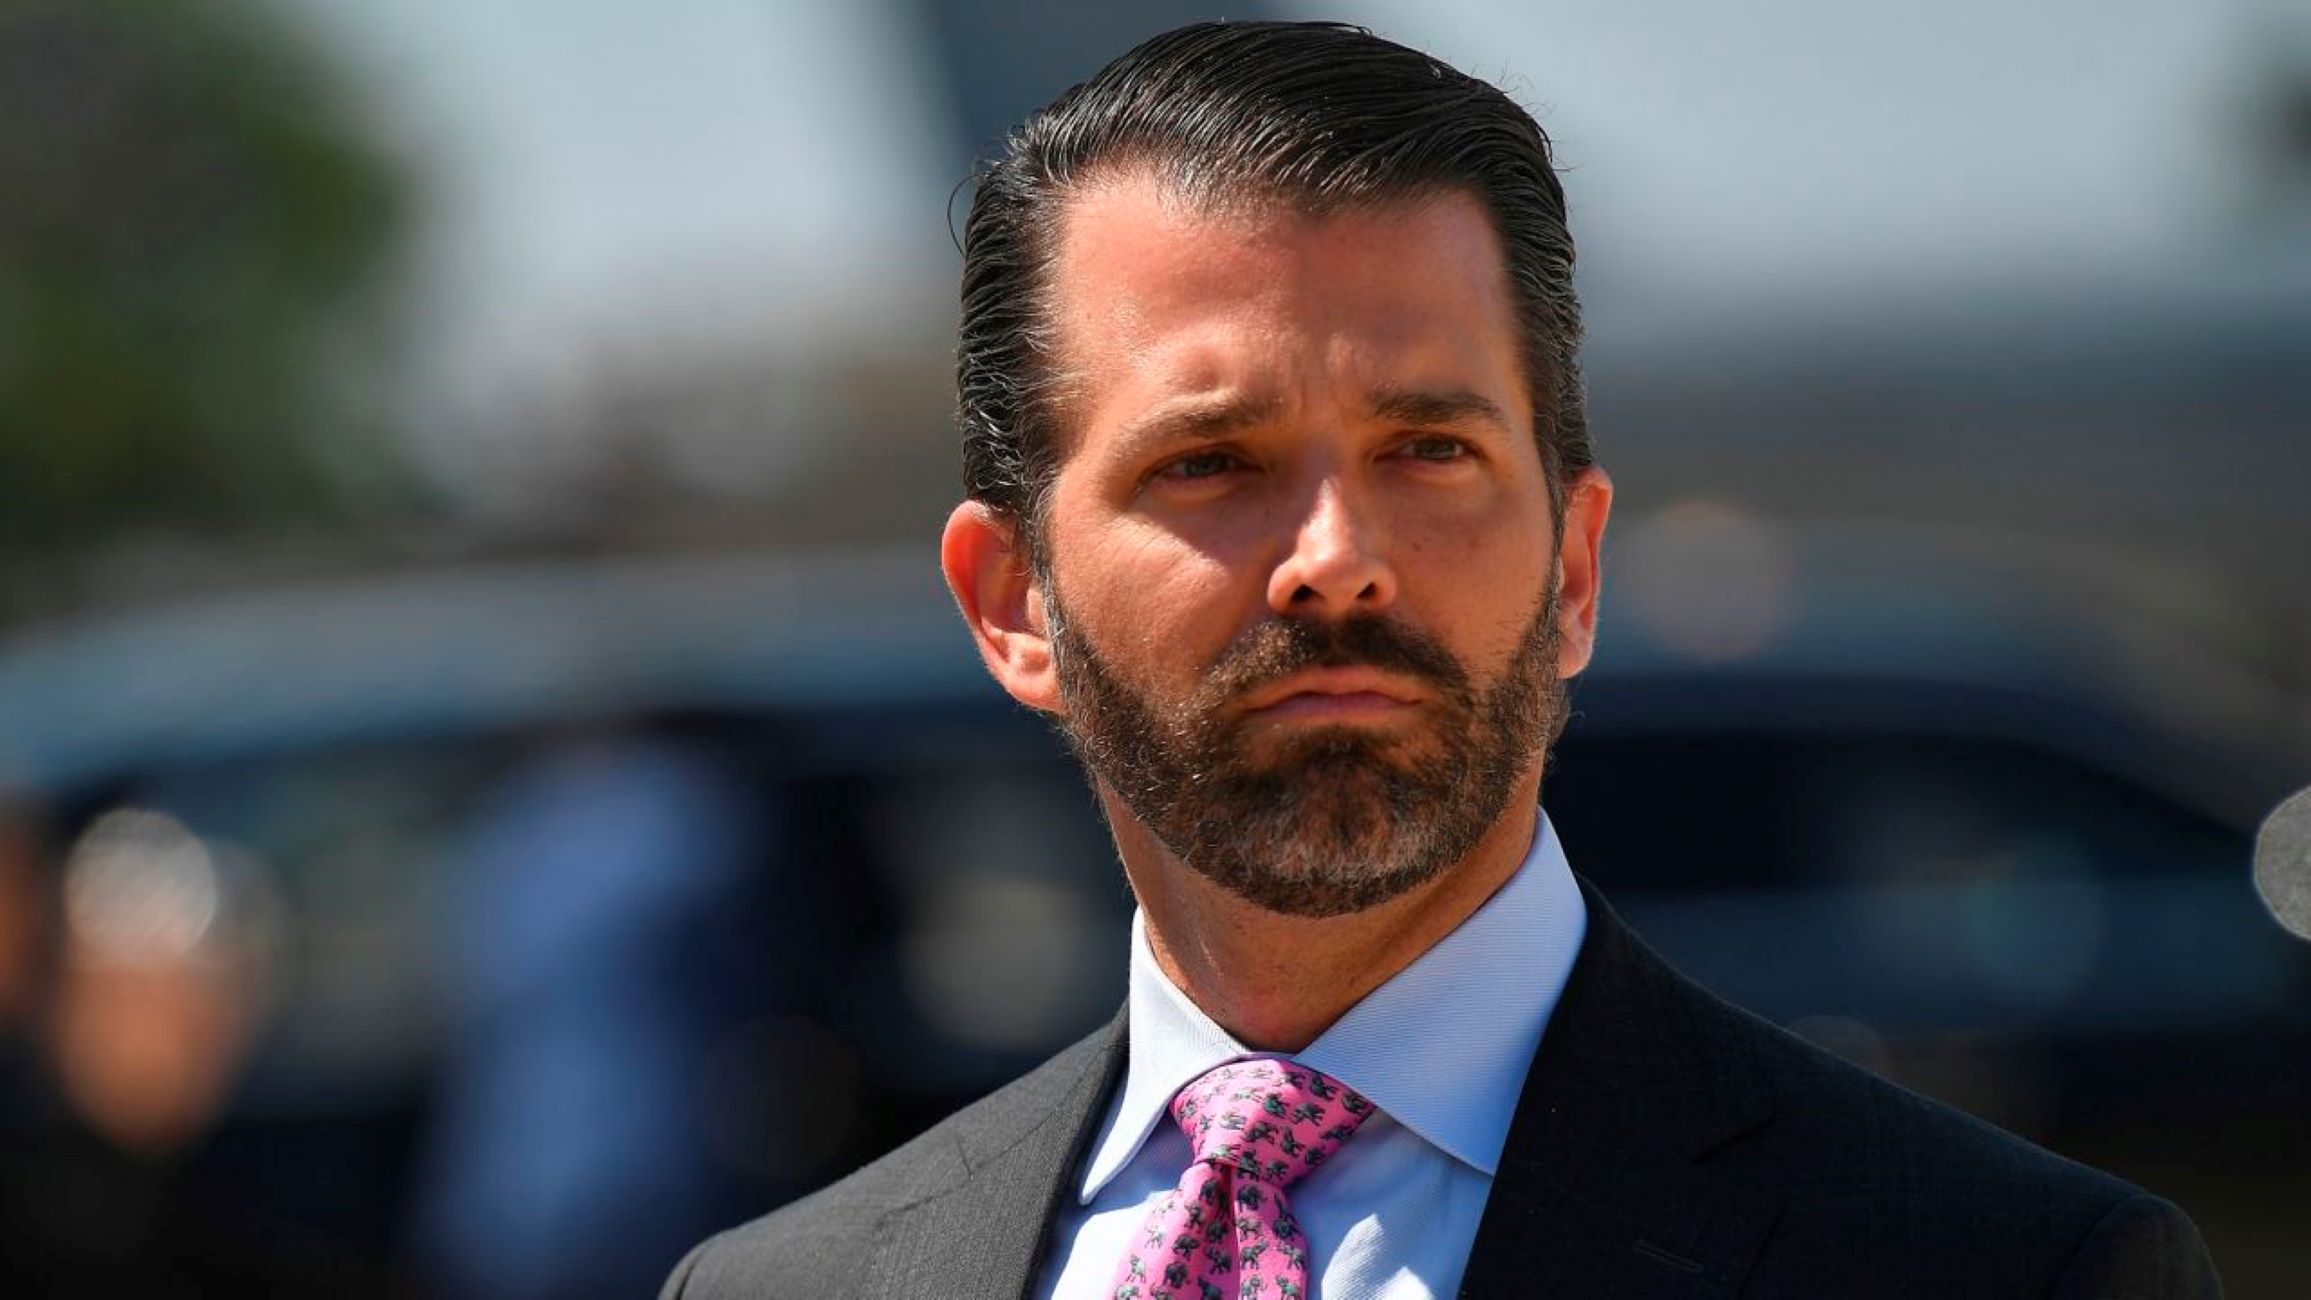 Donald Trump Jr.’s Twitter Account Hacked, Spreads False News About Donald Trump